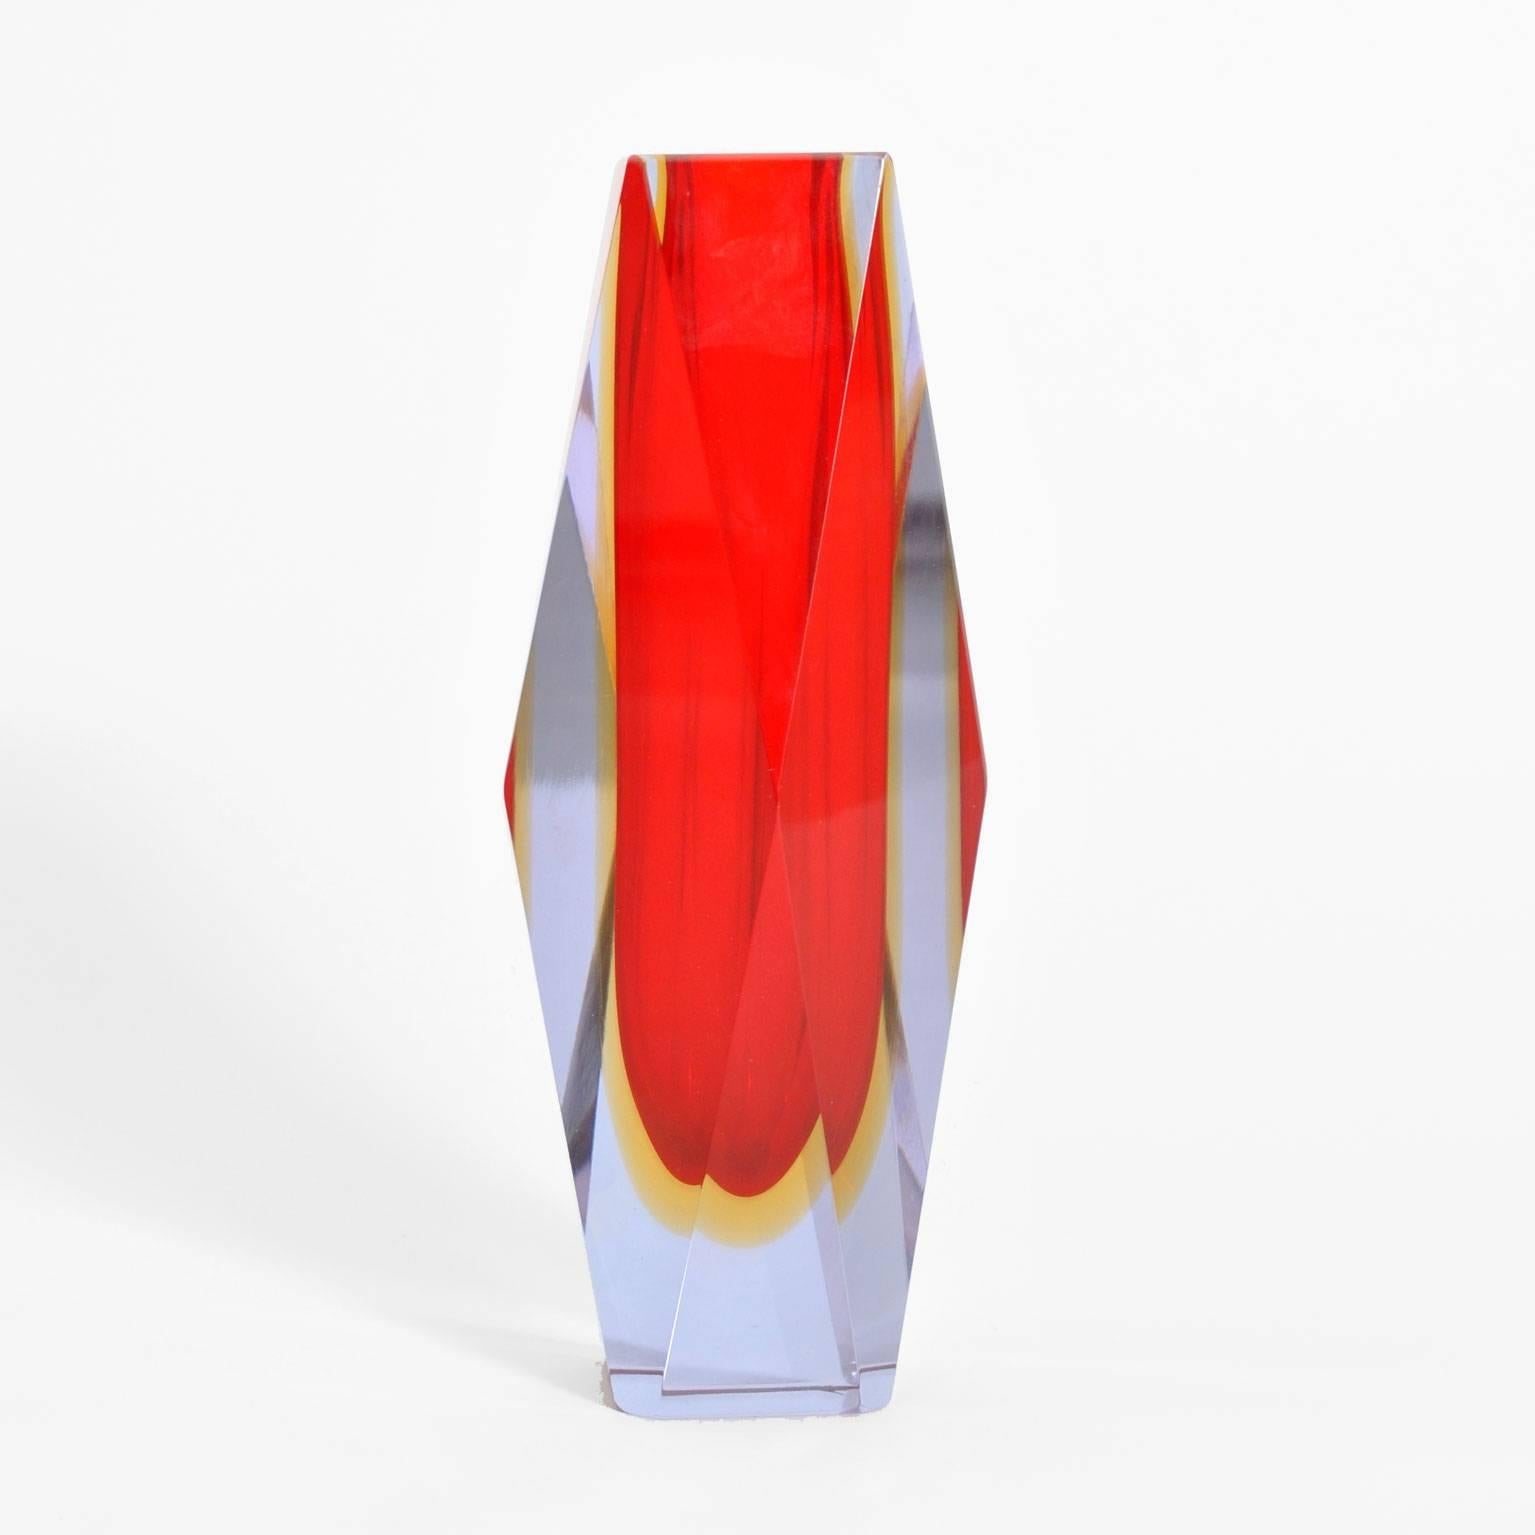 Set of four vases designed by Flavio Poli made in Murano glass carved and molded by hand in red.